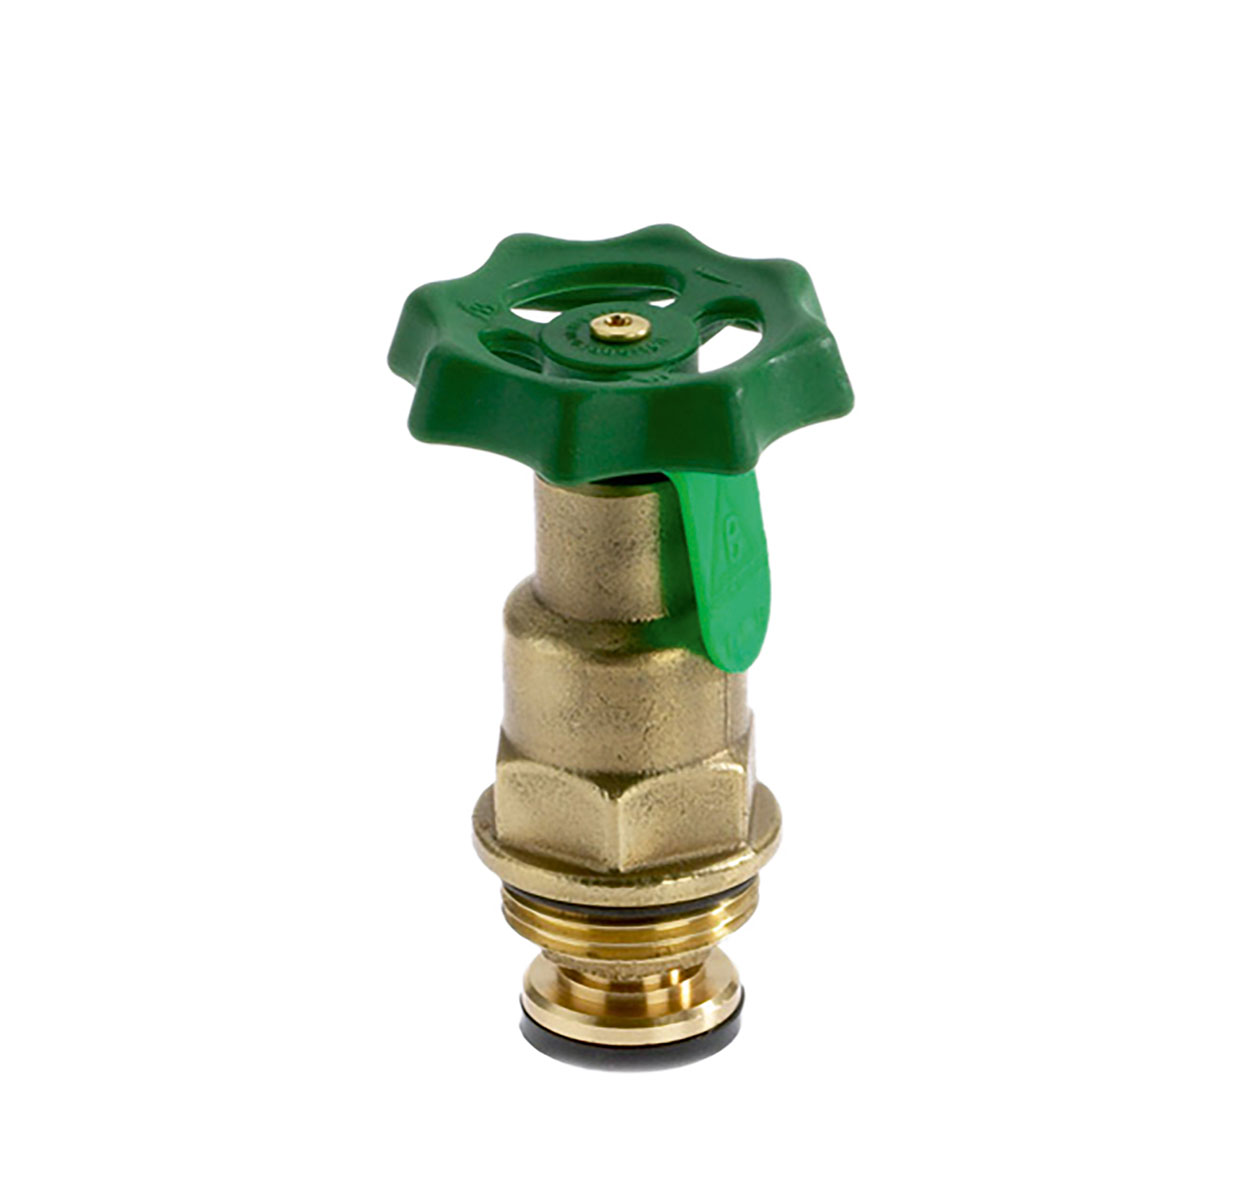 1215250 - Brass Upper-part with grease chamber for Combined Free-flow and Backflow-preventer valves, not-rising spindle